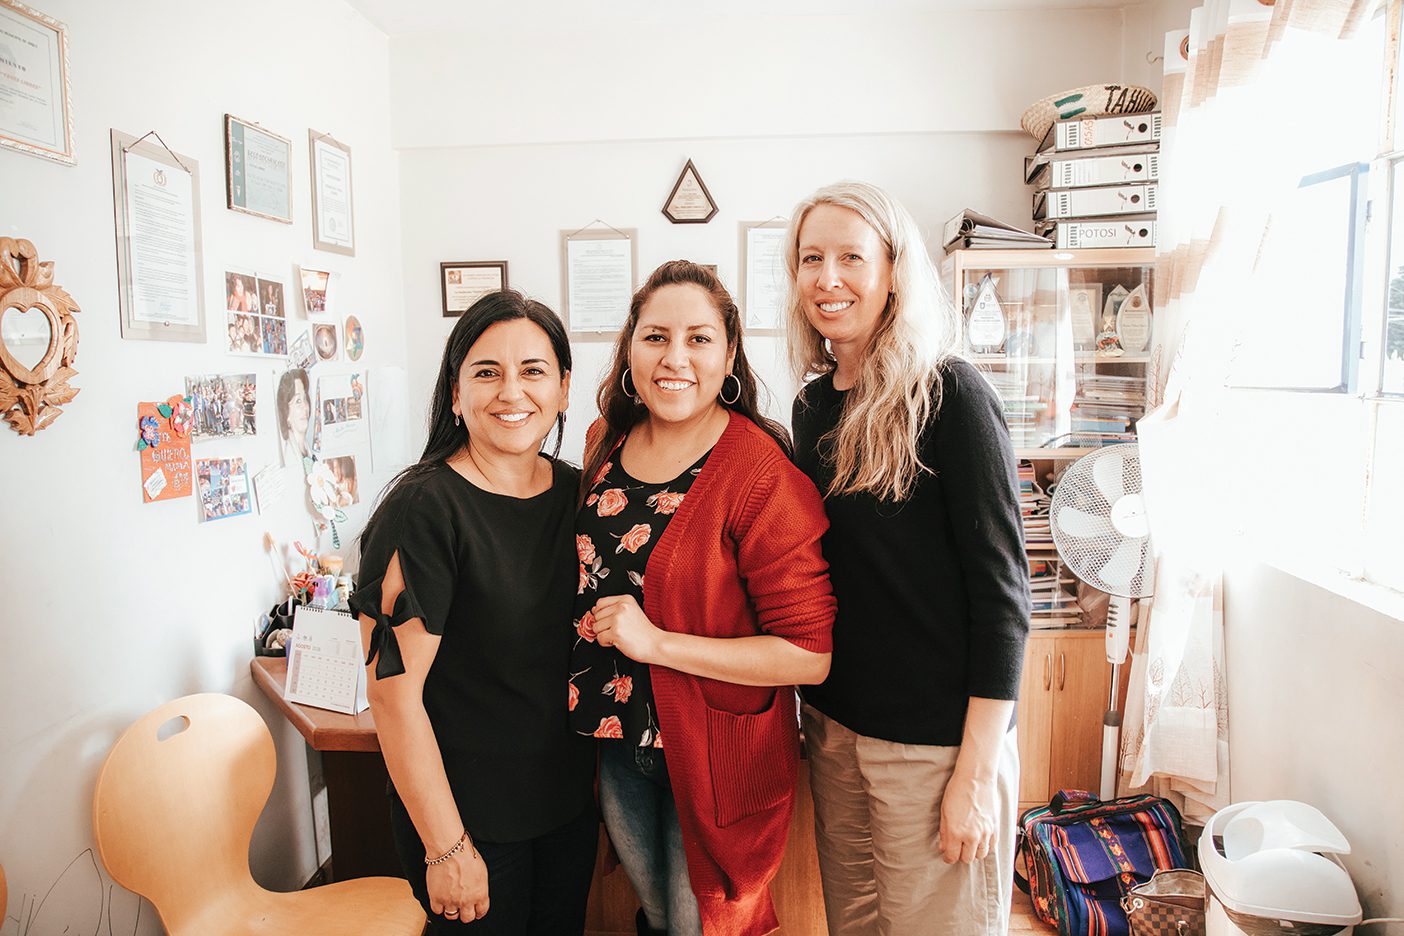 Three women, the founders of Yapay Bolivia, pose for a photo together in someone's home.